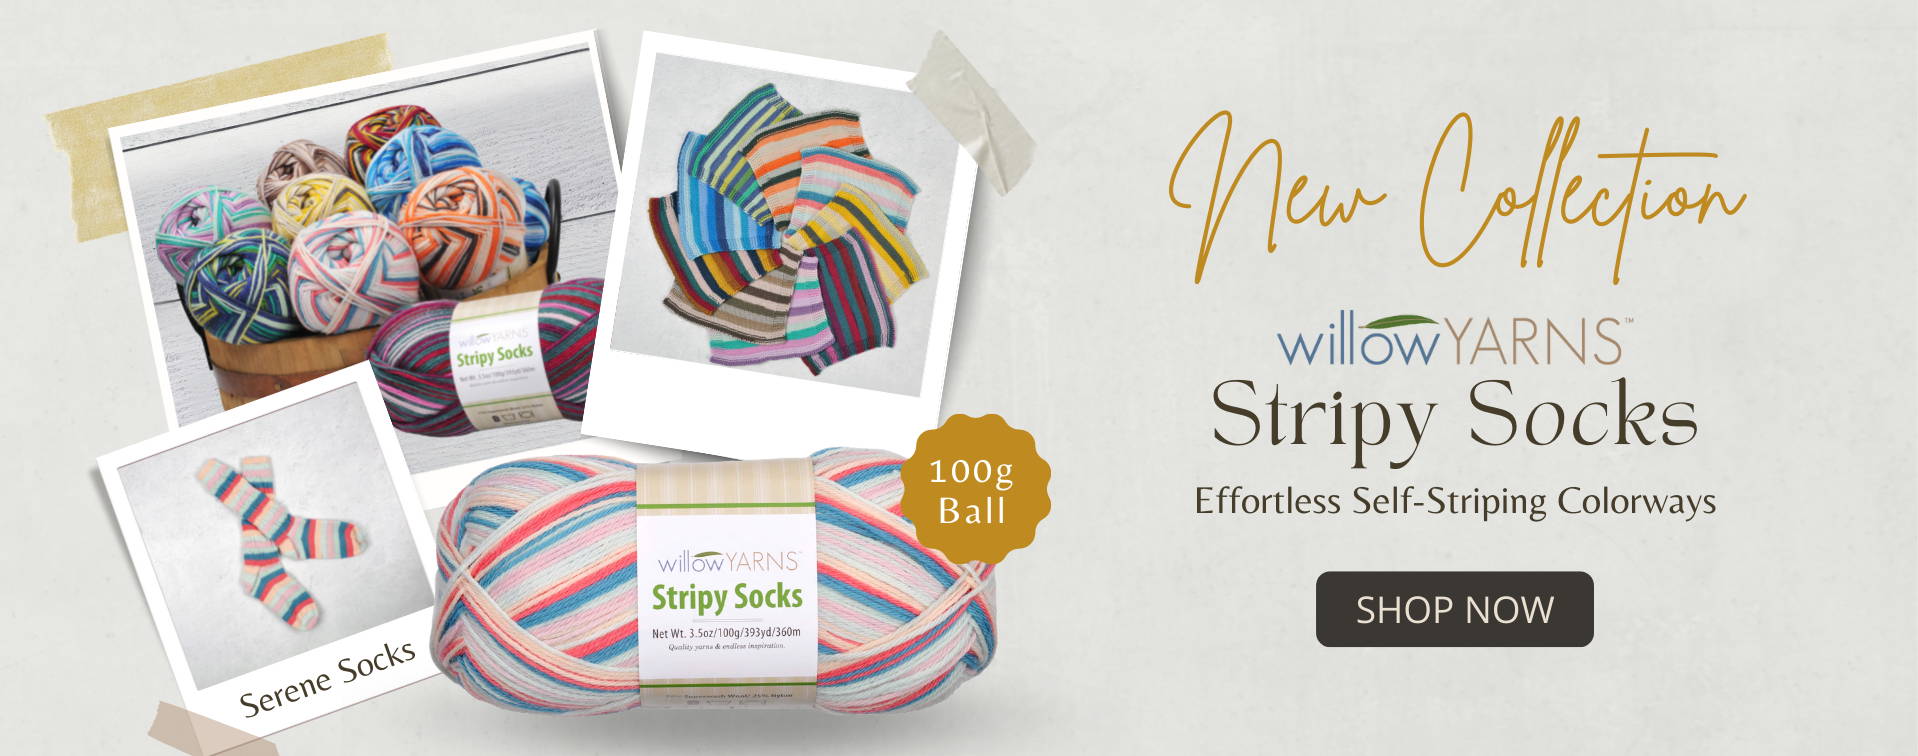 New Collection: Willow Yarns Stripy Socks. Effortless self-striping colorways. Shop Now. >>